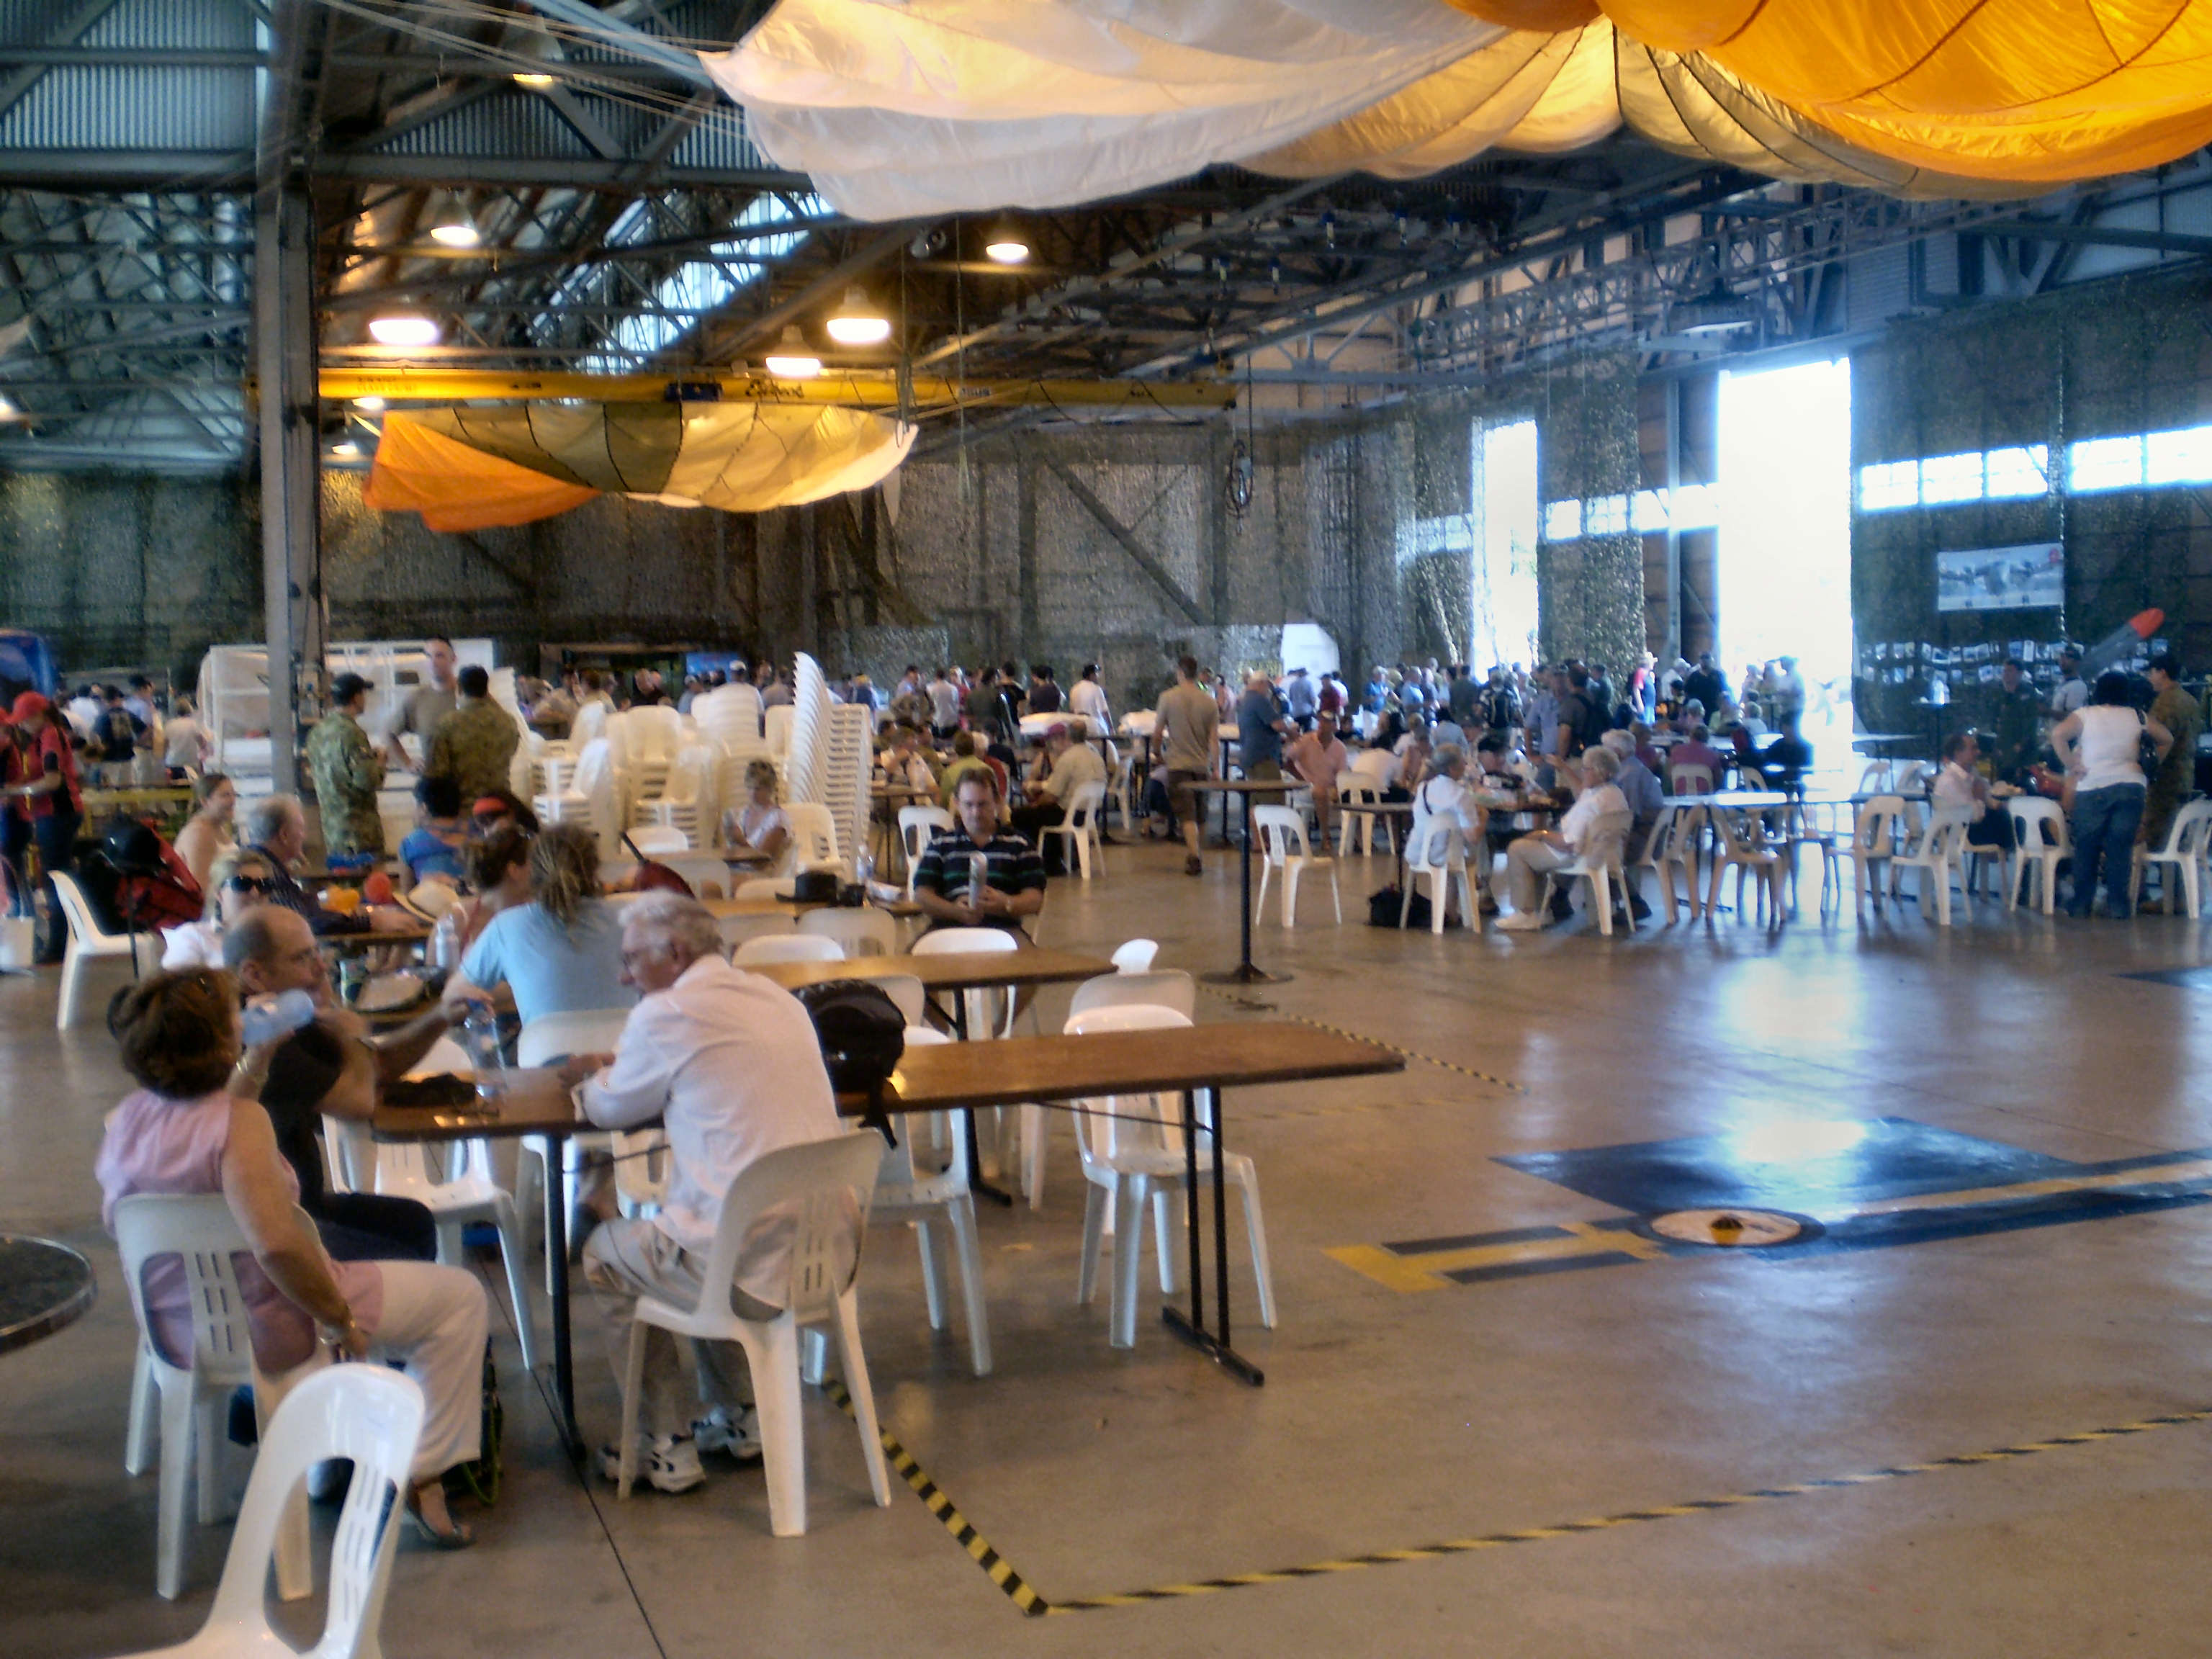 Saturday afternoon in the hanger